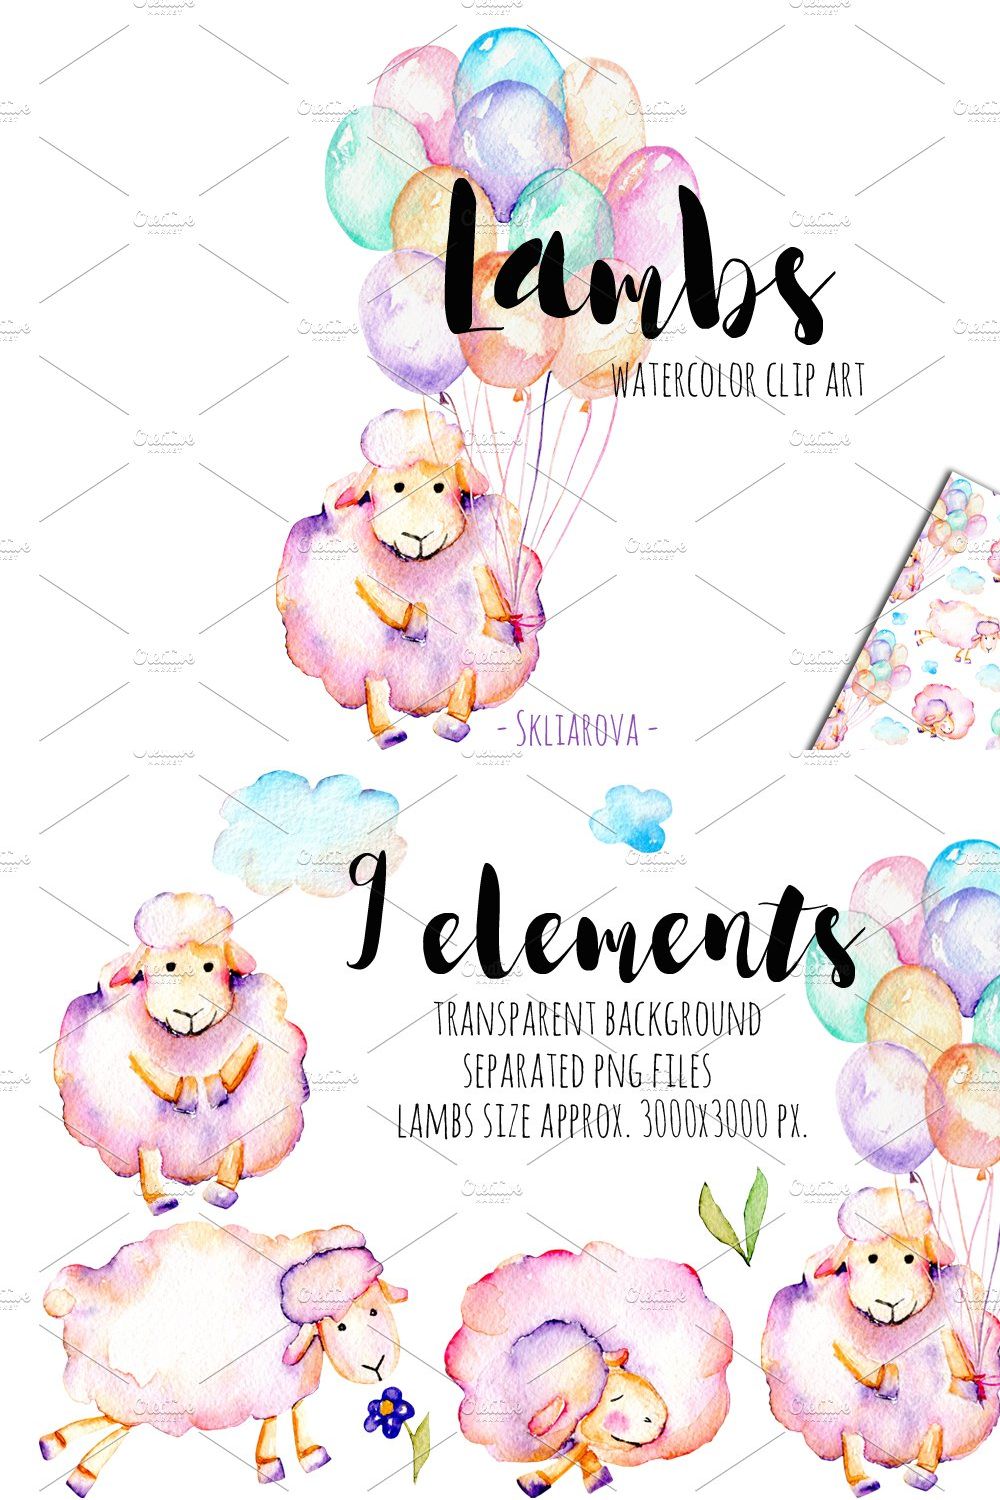 Lambs. Watercolor clipart pinterest preview image.